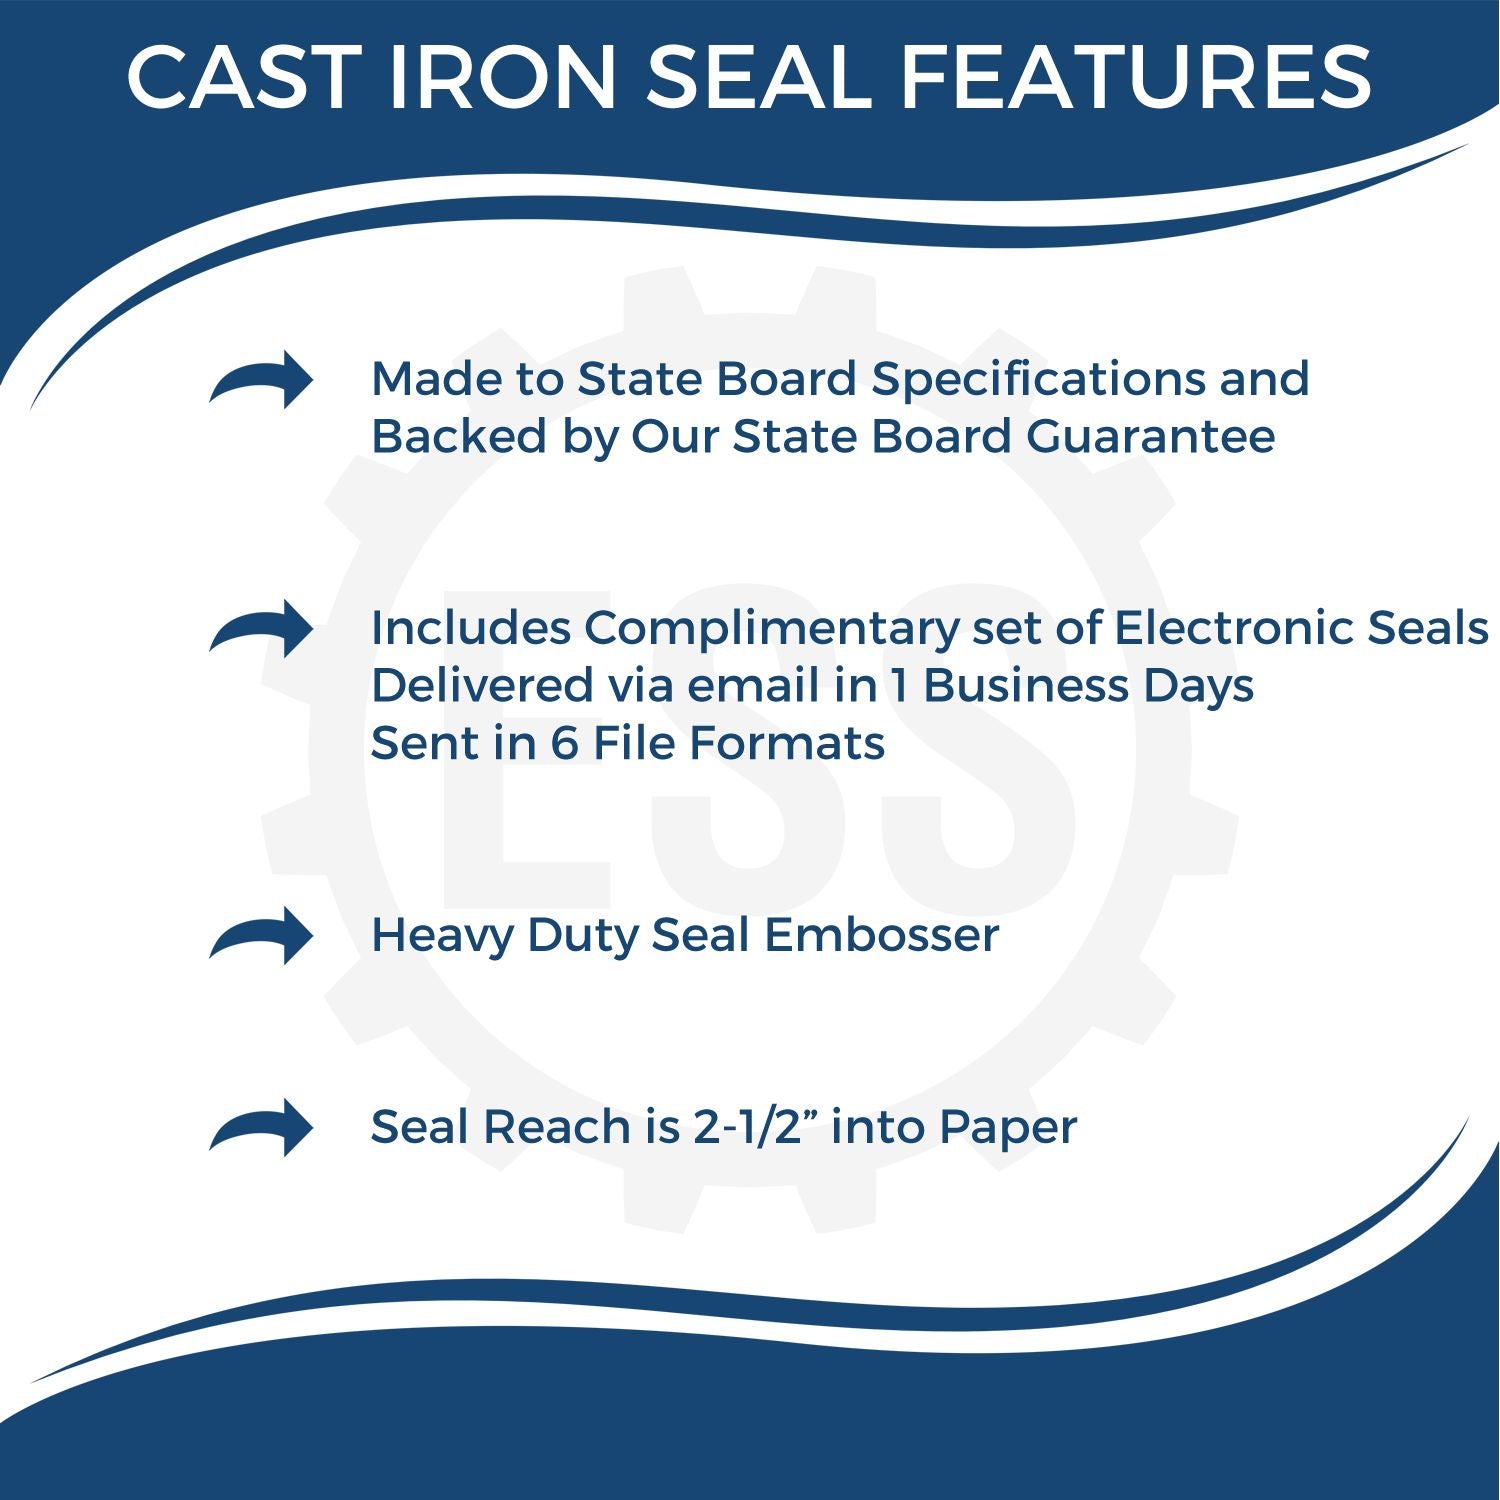 The main image for the Heavy Duty Cast Iron Kansas Engineer Seal Embosser depicting a sample of the imprint and electronic files